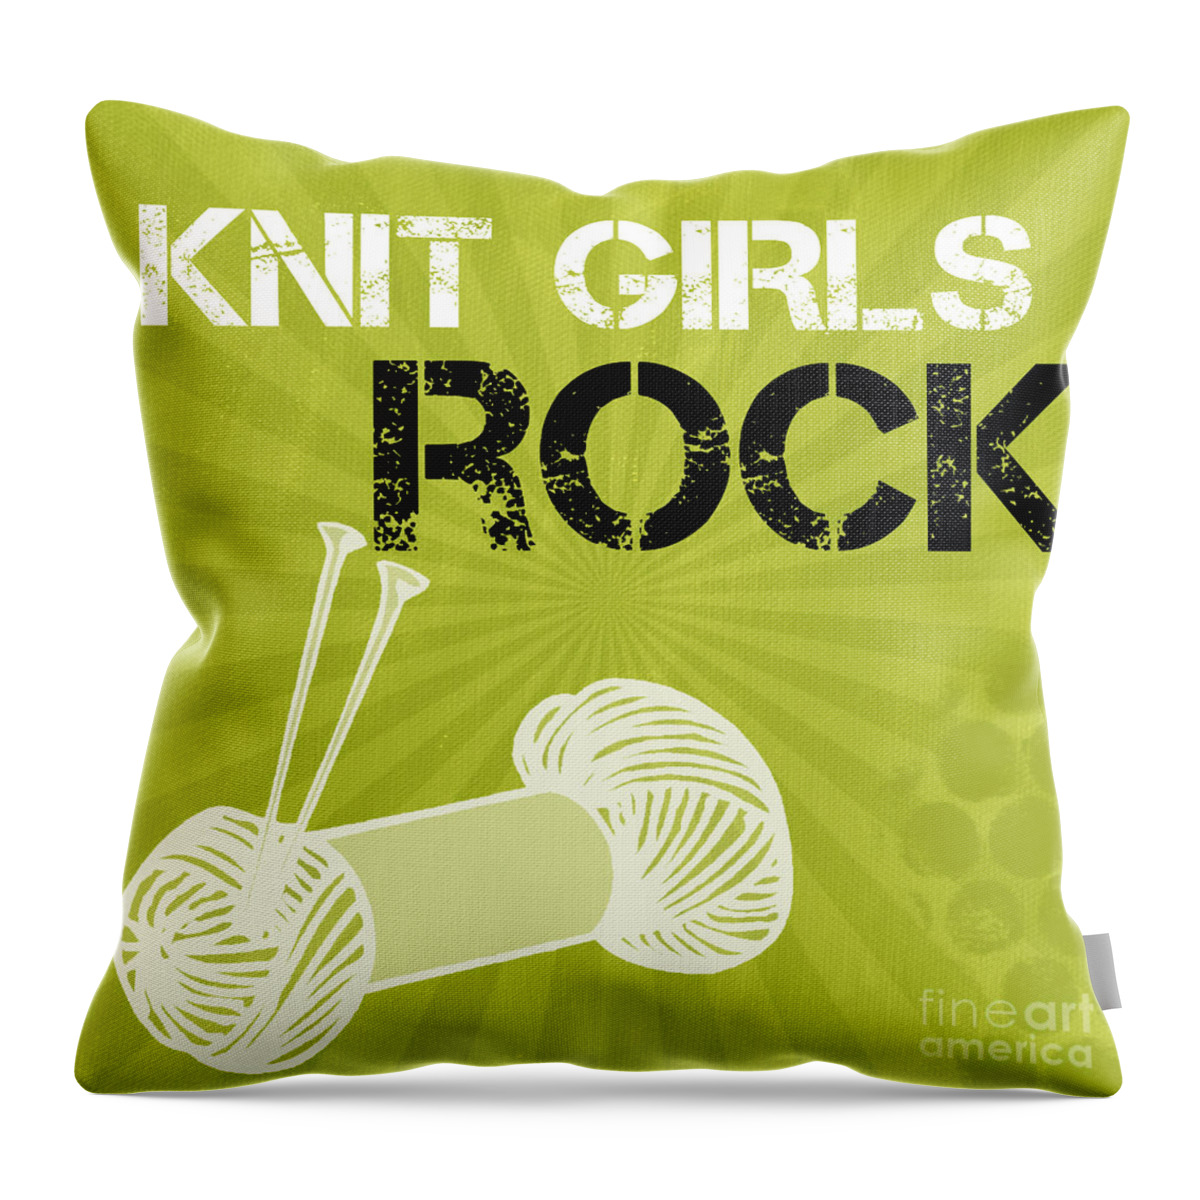 Knit Throw Pillow featuring the mixed media Knit Girls Rock by Linda Woods